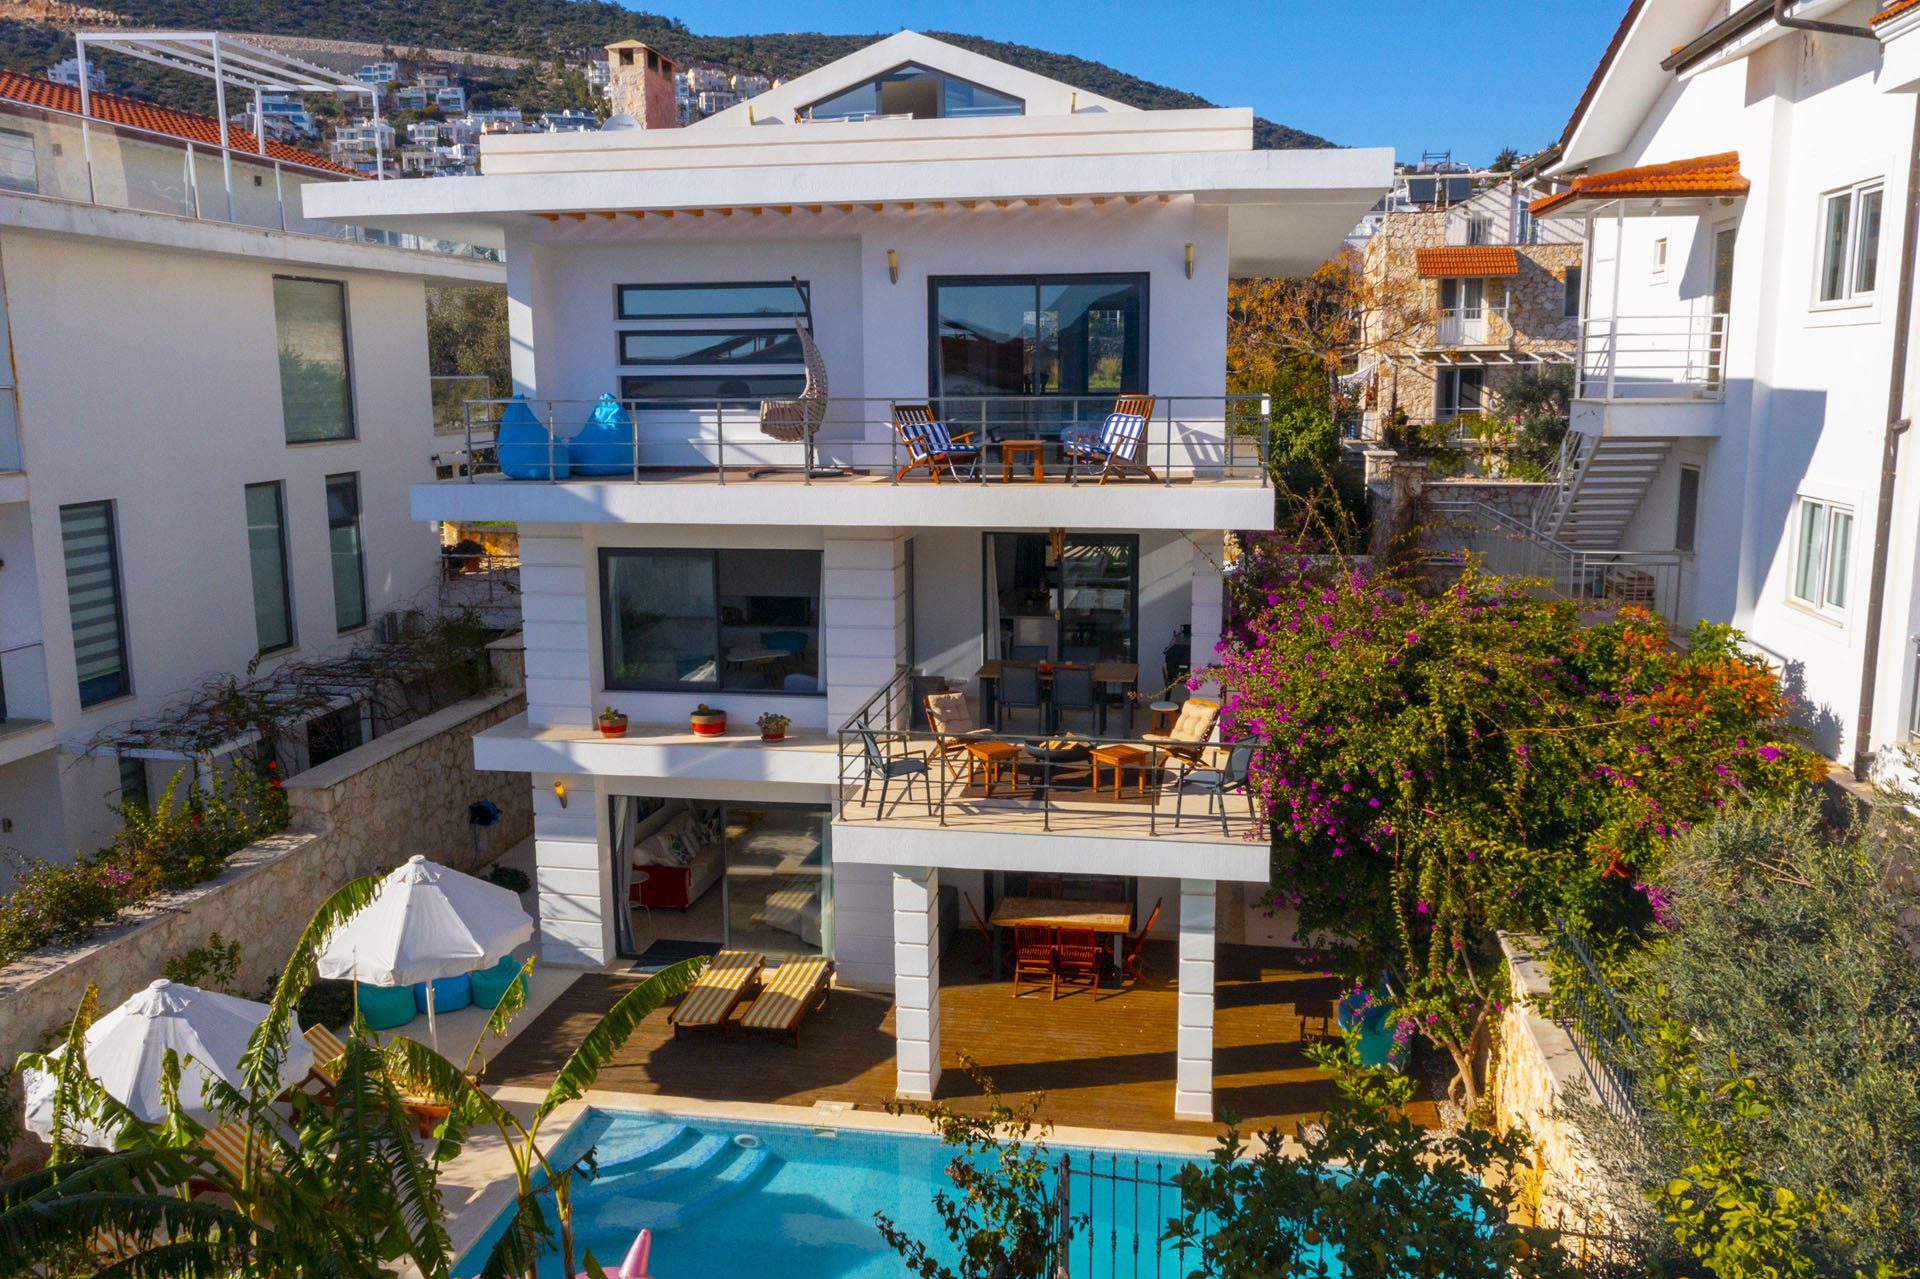 Property Image 2 - Luxury Holidays in this Ultra-Modern Detached Kalkan Villa